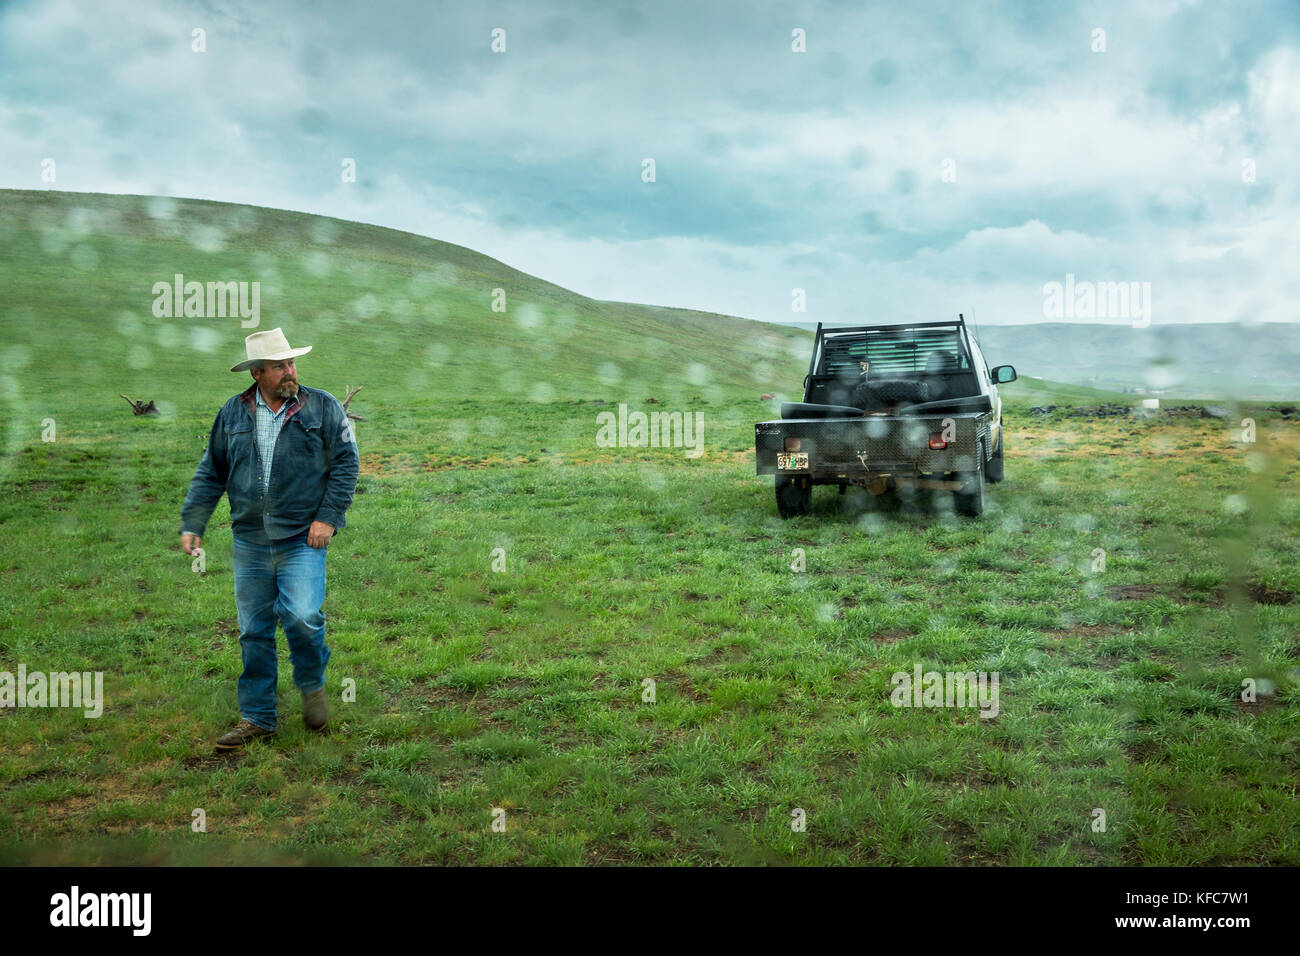 USA, Oregon, Enterprise, Cowboy and Rancher Todd Nash walks in the rain in front of his old pickup truck Stock Photo